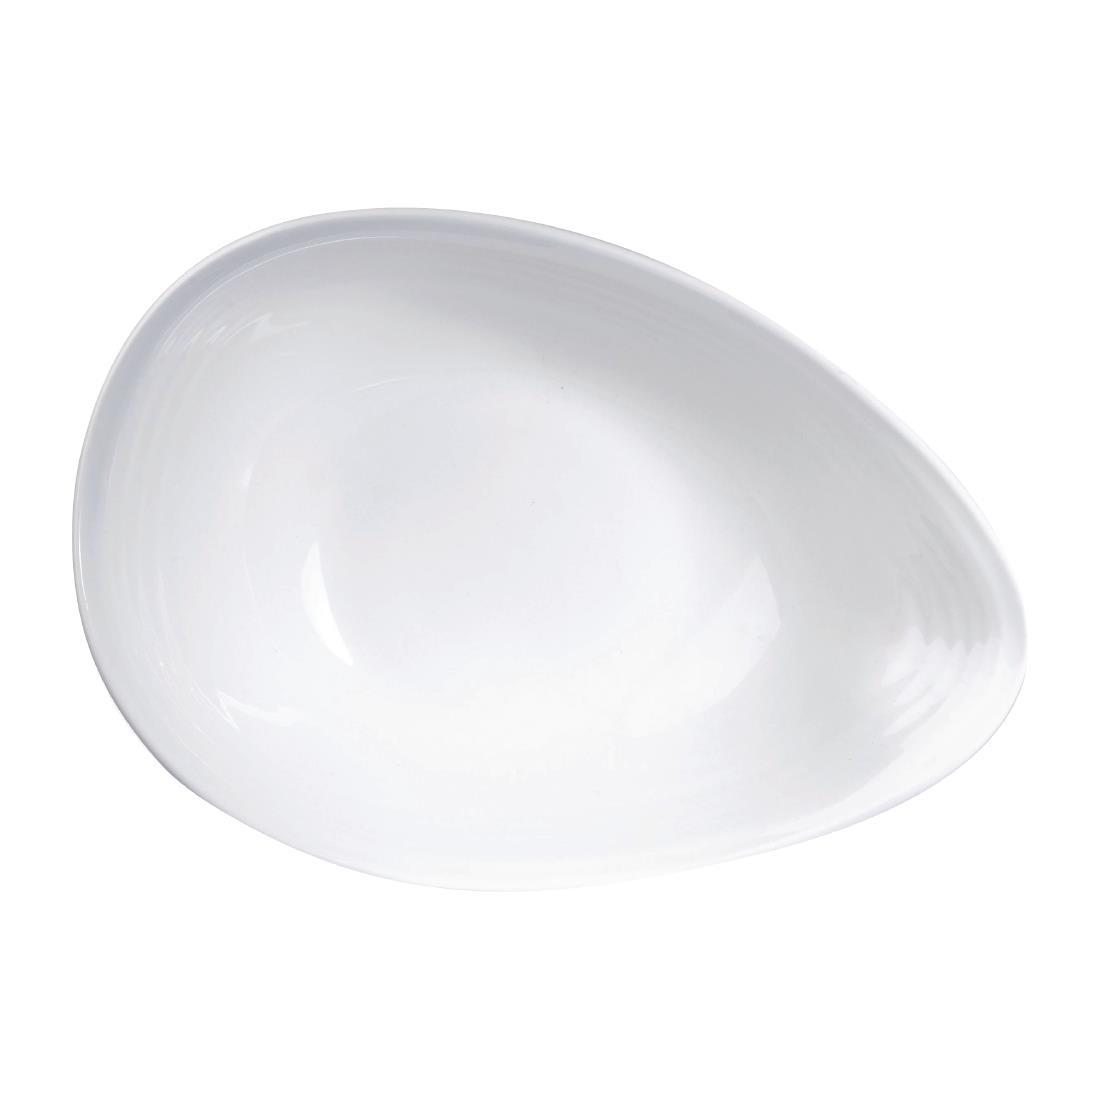 Churchill Discover Tear Bowls White 213mm (Pack of 12) - CY188  - 3